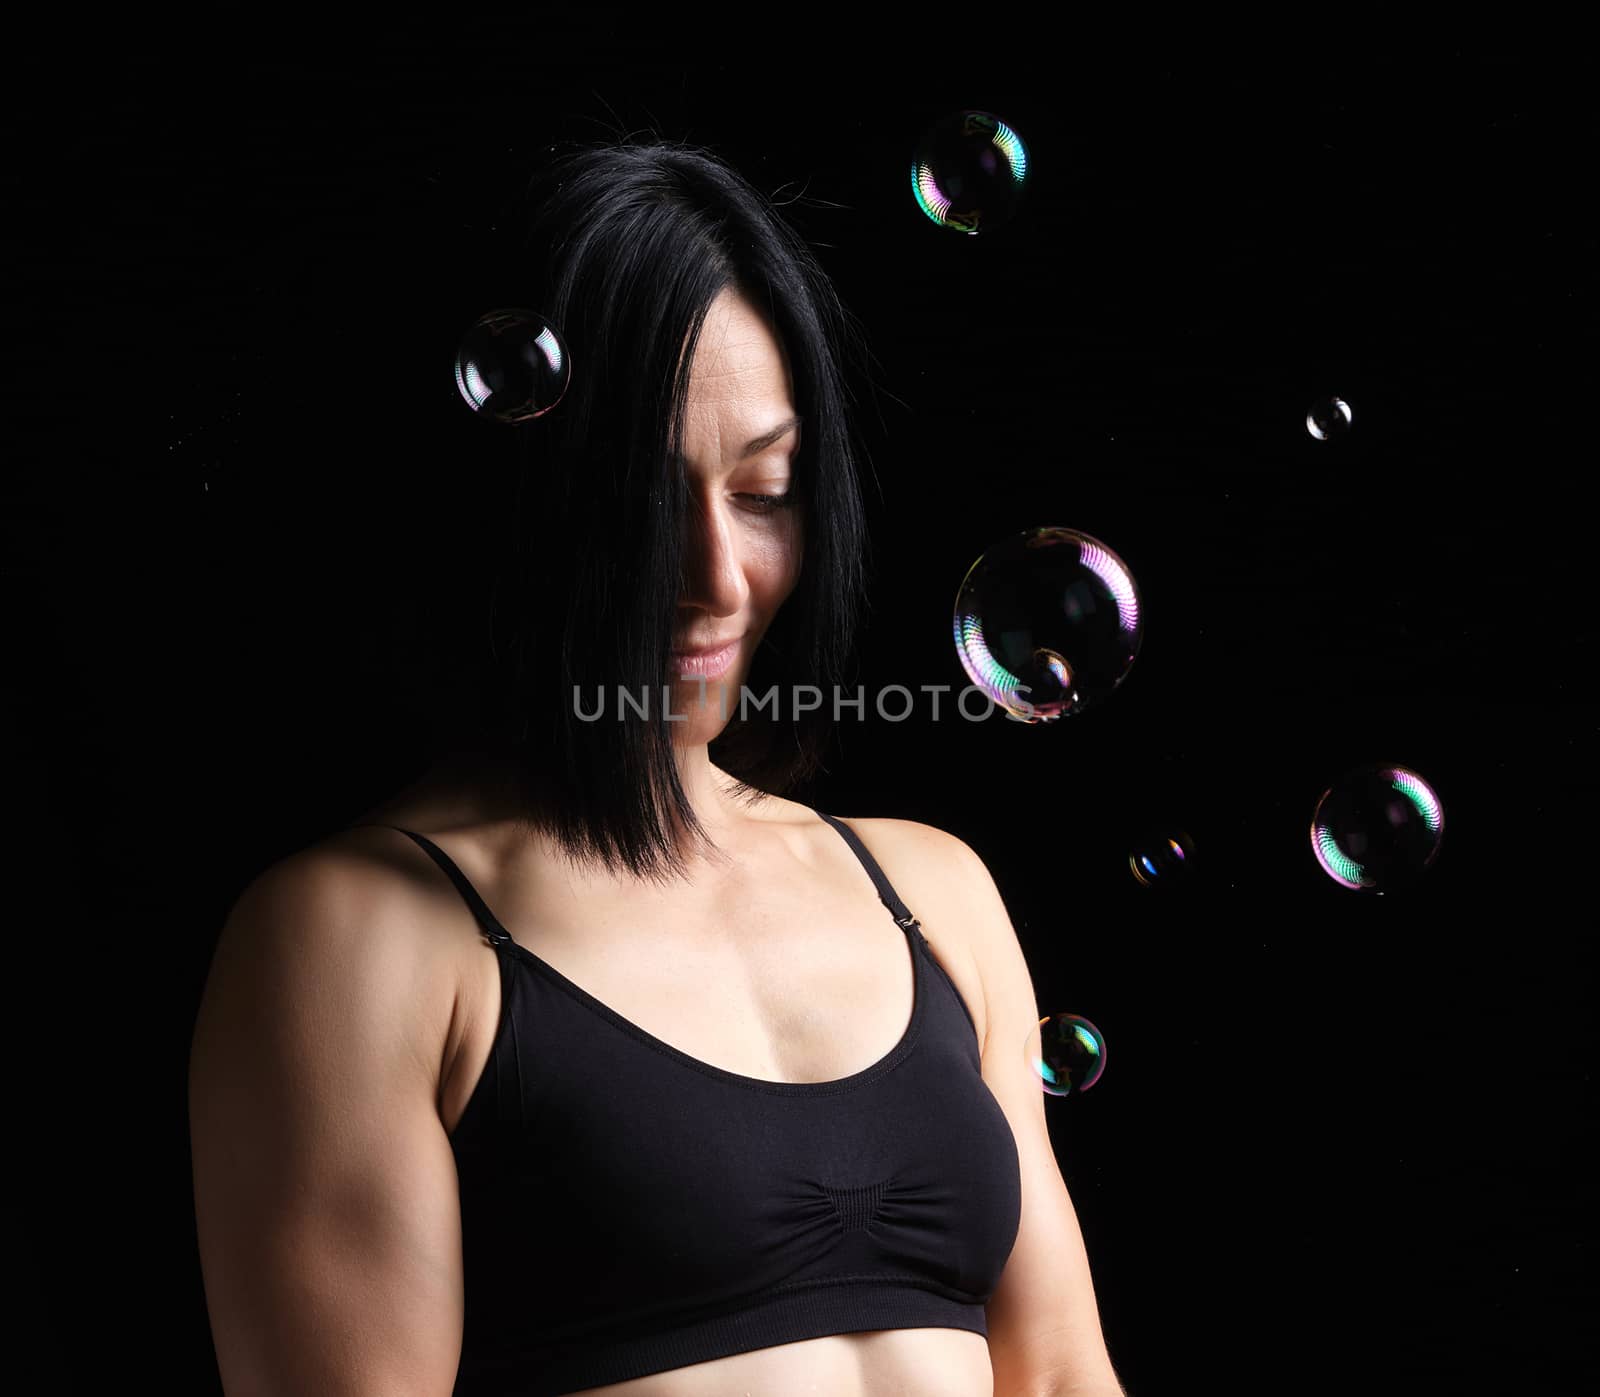 portrait of a young girl with black short hair and a sports figu by ndanko